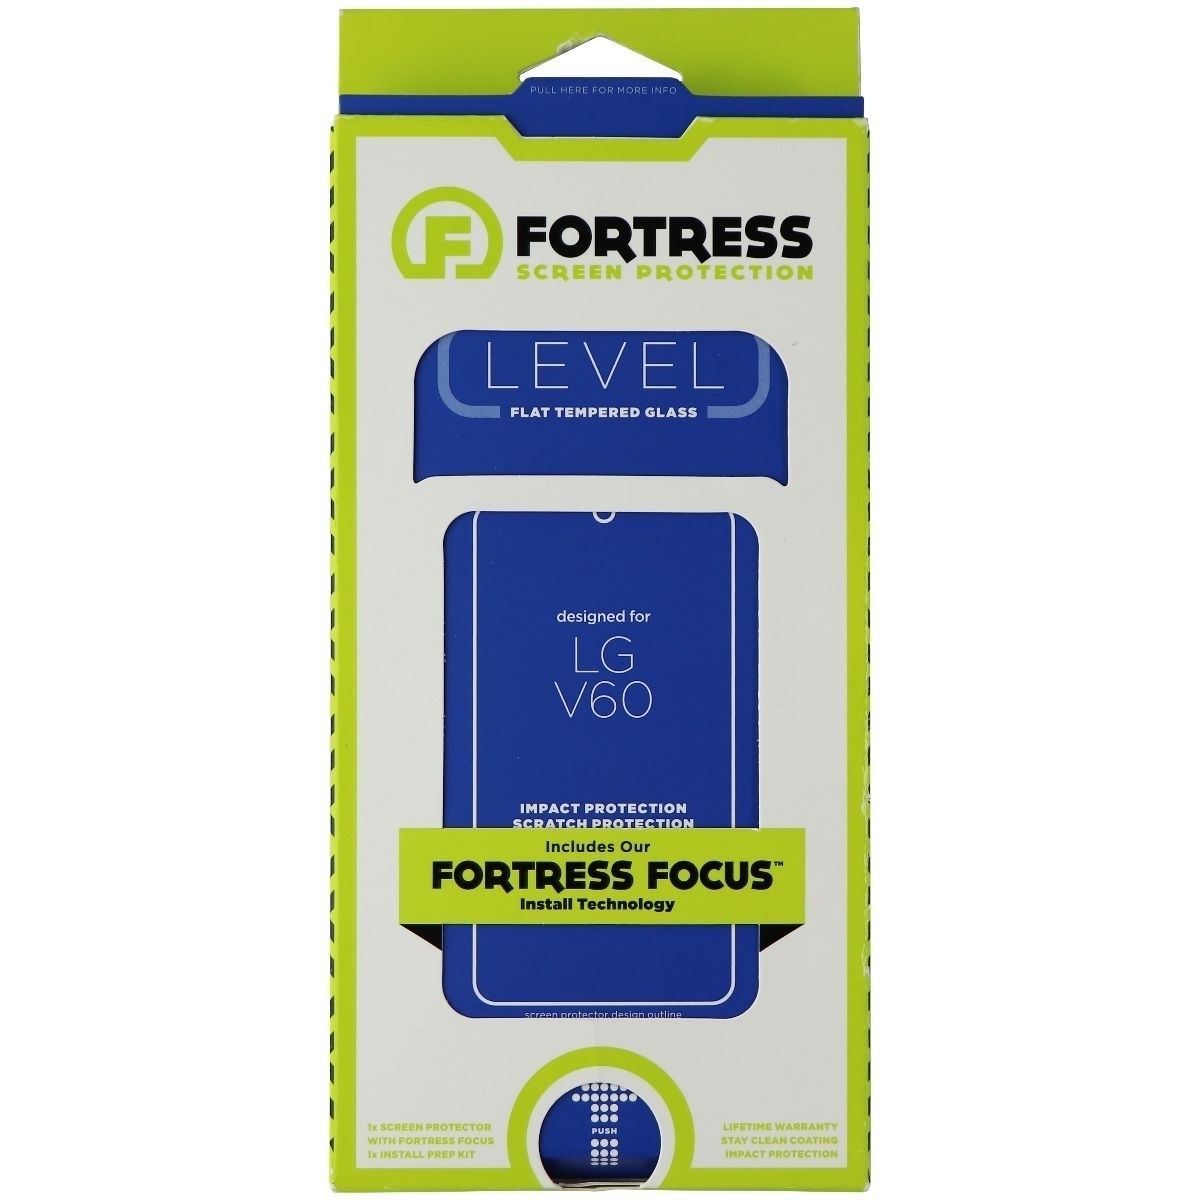 Fortress LEVEL Flat Tempered Glass For LG V60 Smartphones - Clear